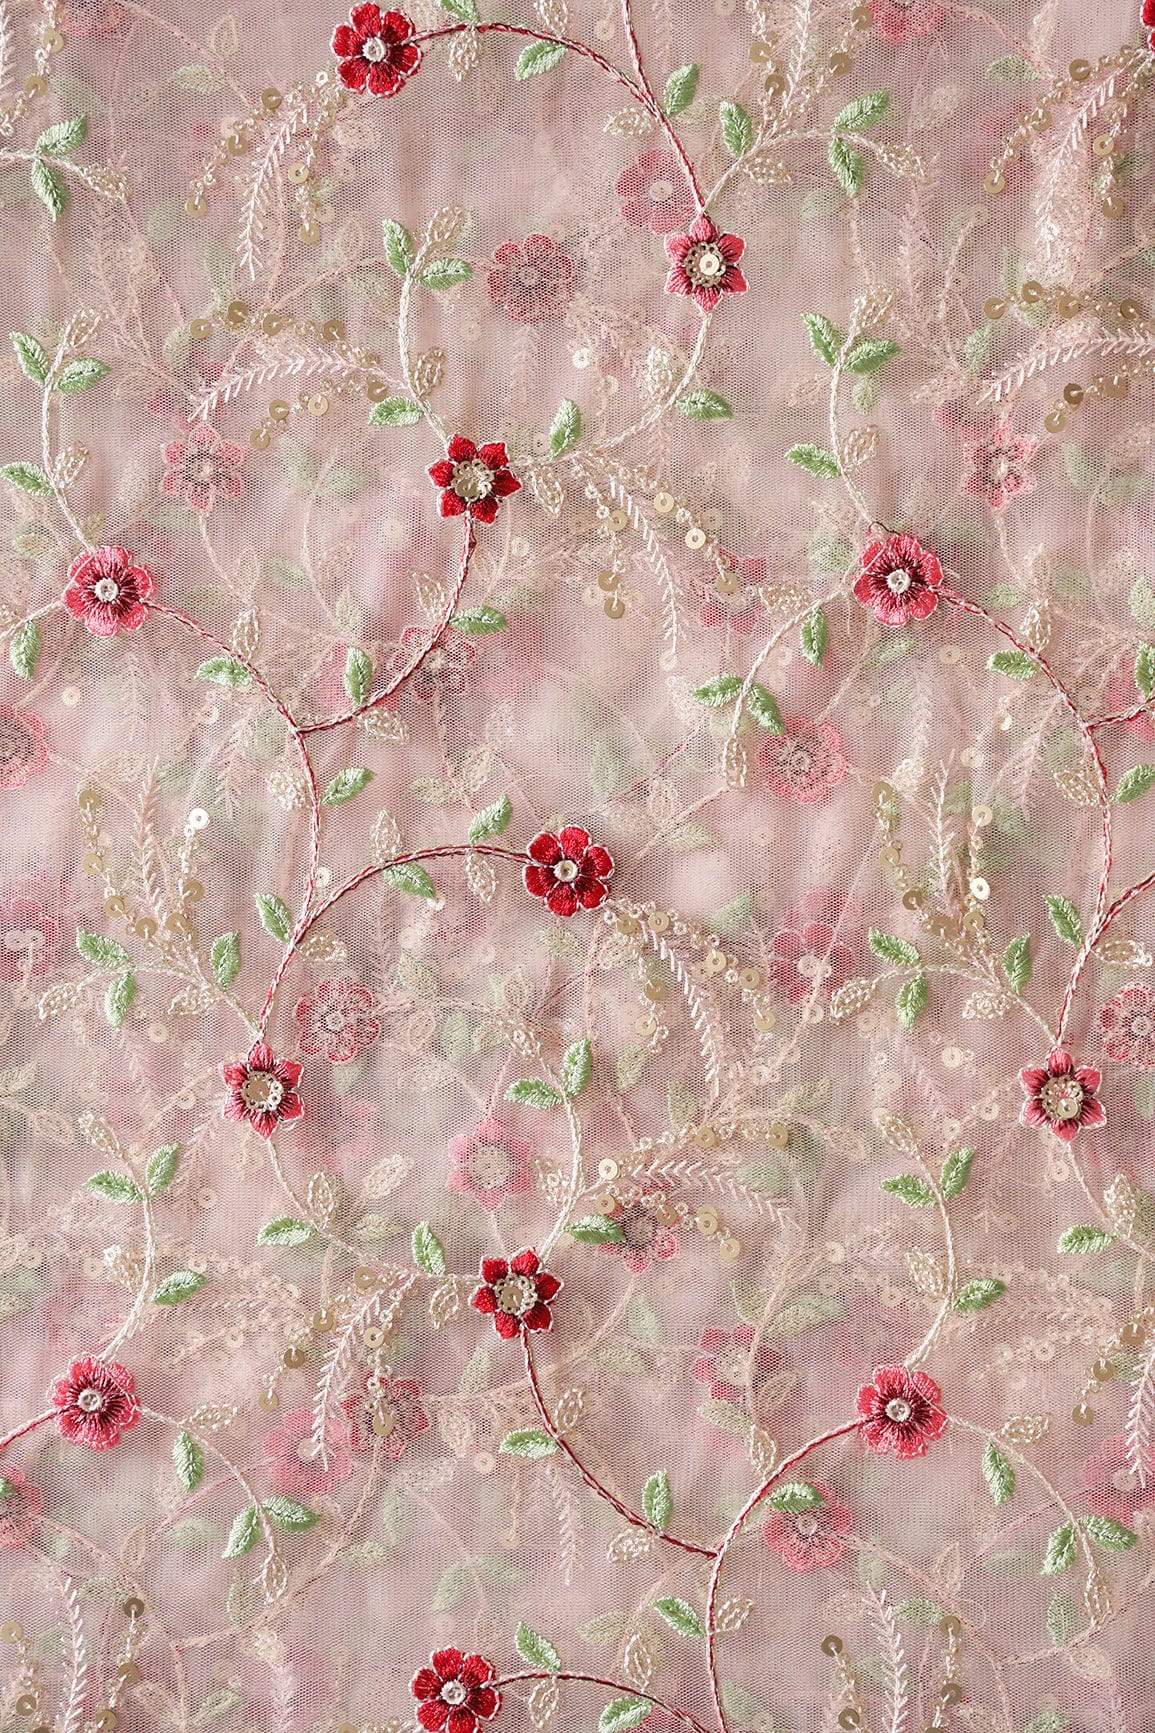 doeraa Embroidery Fabrics Red And Olive Thread With Gold Sequins Small Floral Embroidery On Baby Pink Soft Net Fabric